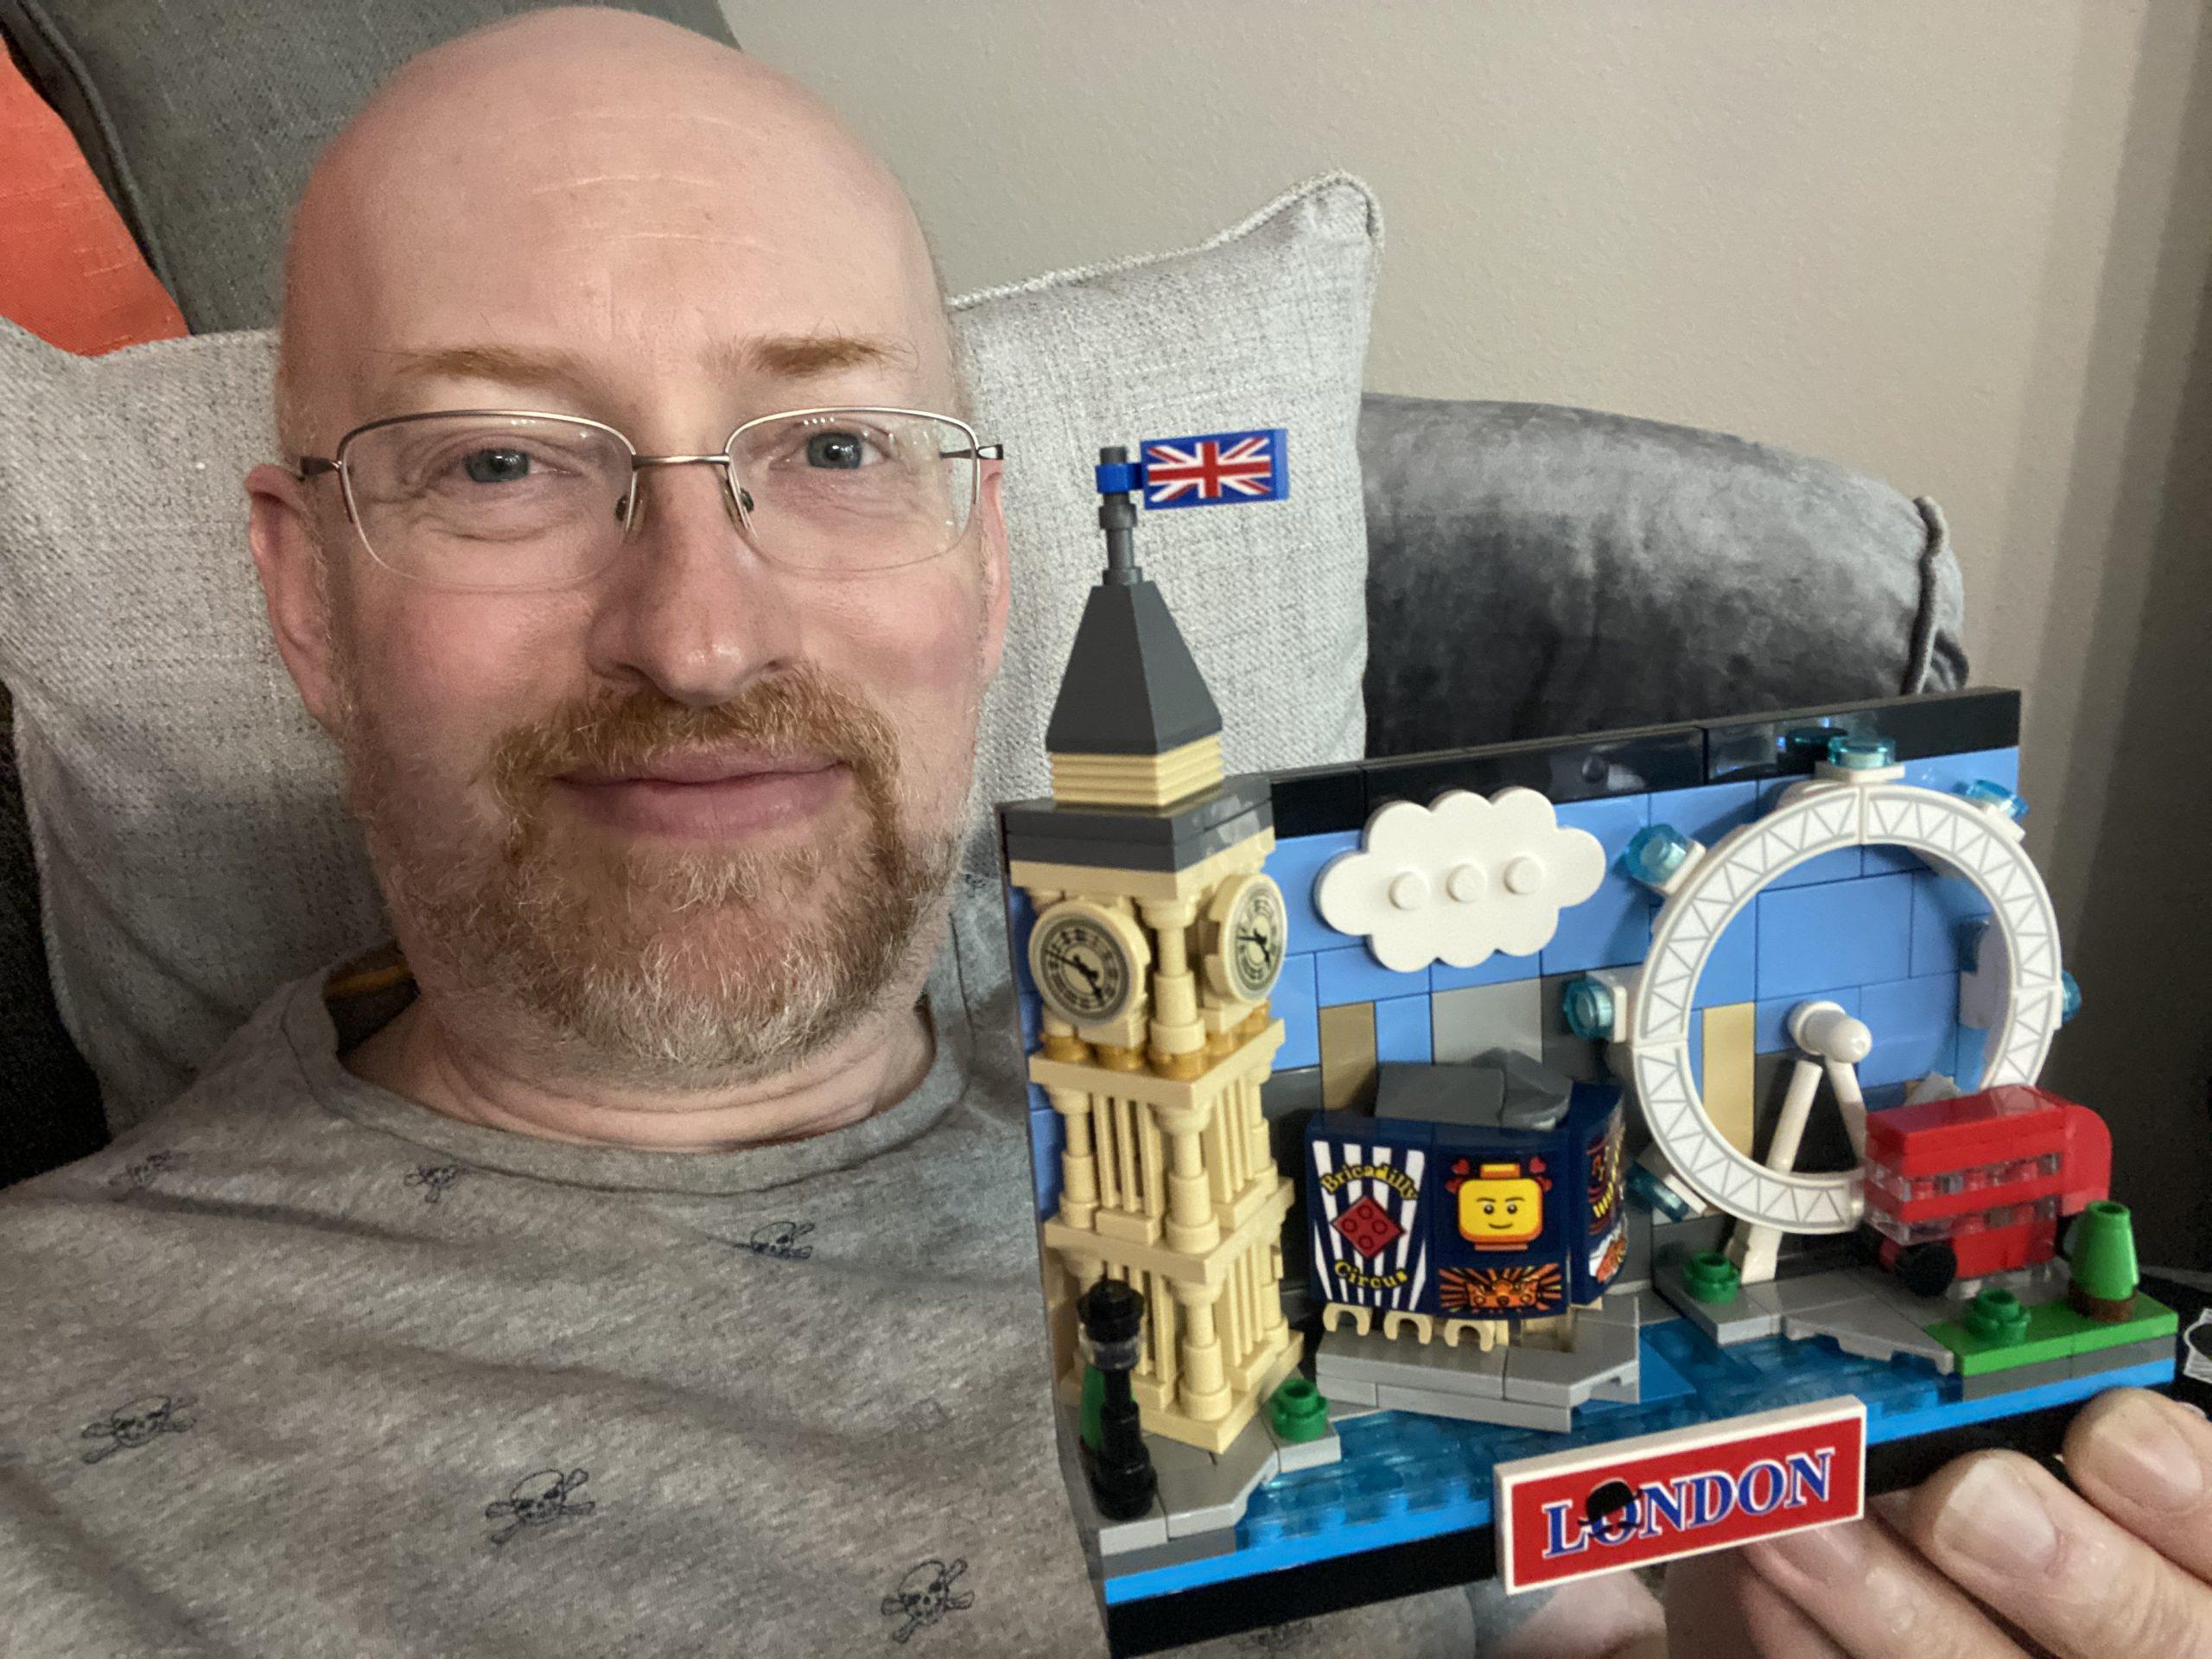 Me on the couch holding a small Lego model of London featuring Big Ben, Picadilly Circus, the London Eye, and a classic red double-decker bus.